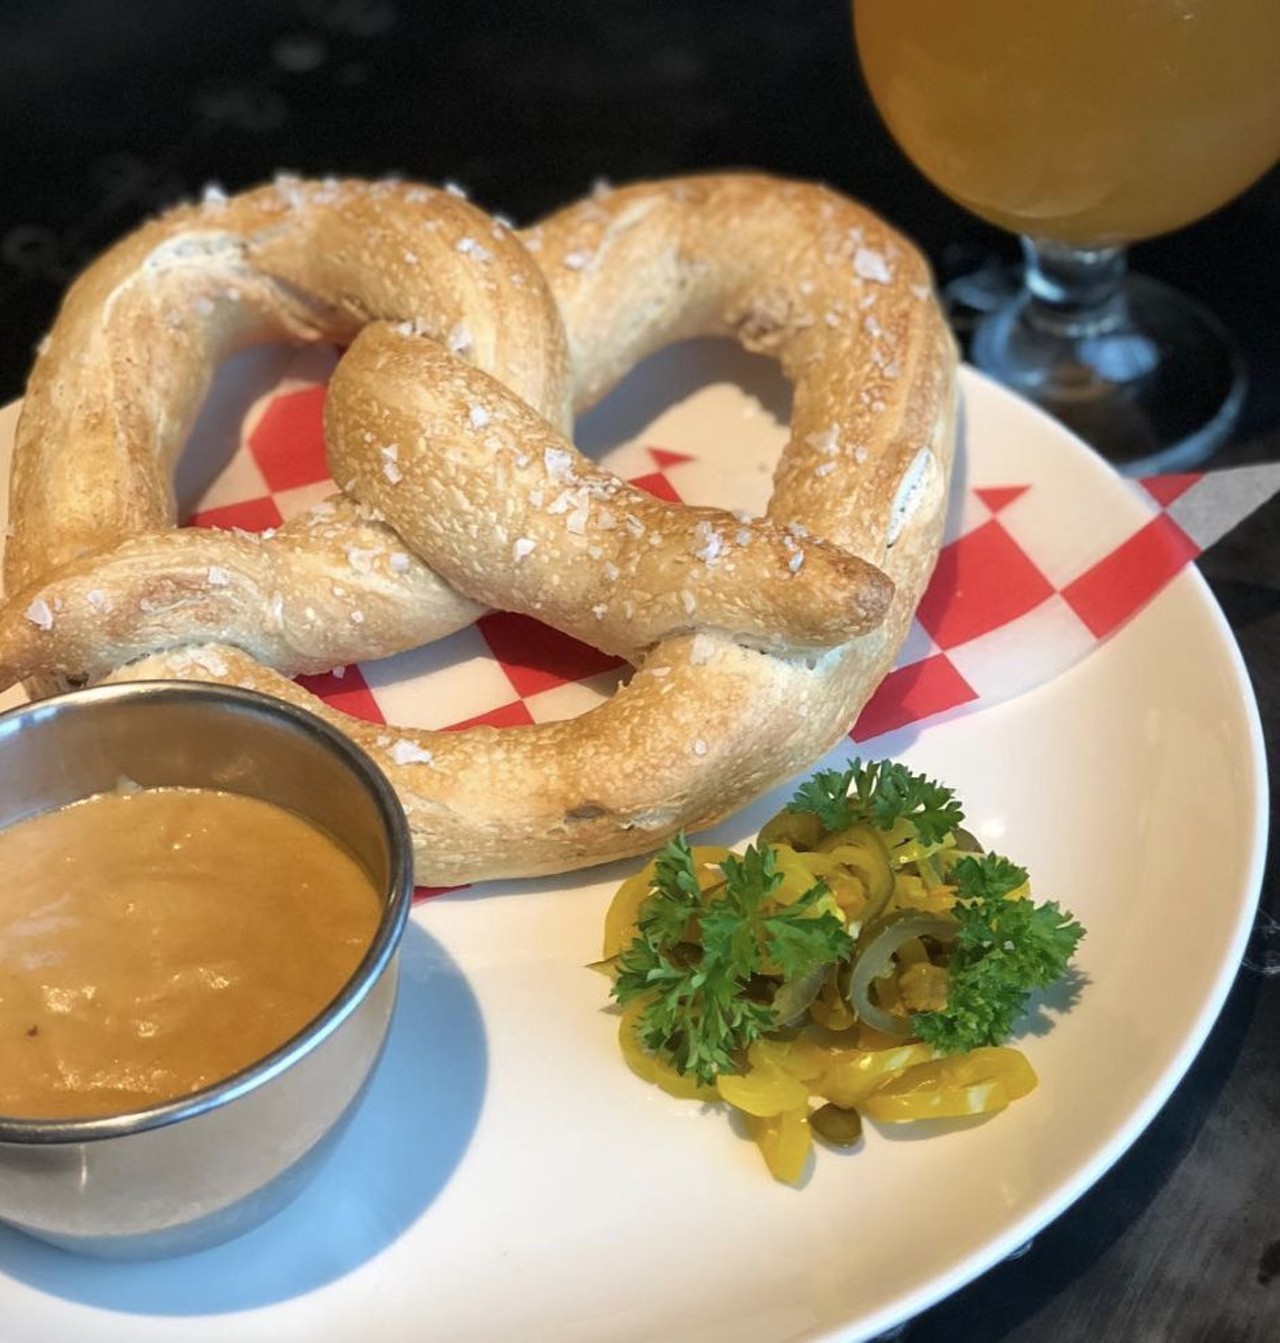 Livernois Tap
567 Livernois Ave, Ferndale, MI 48220
With pigs in a blanket, steak fries, pretzels, and donut holes, Livernois Tap has enough finger food to keep both you and your kids satisfied.
Photo courtesy of @axlebrewingco</a